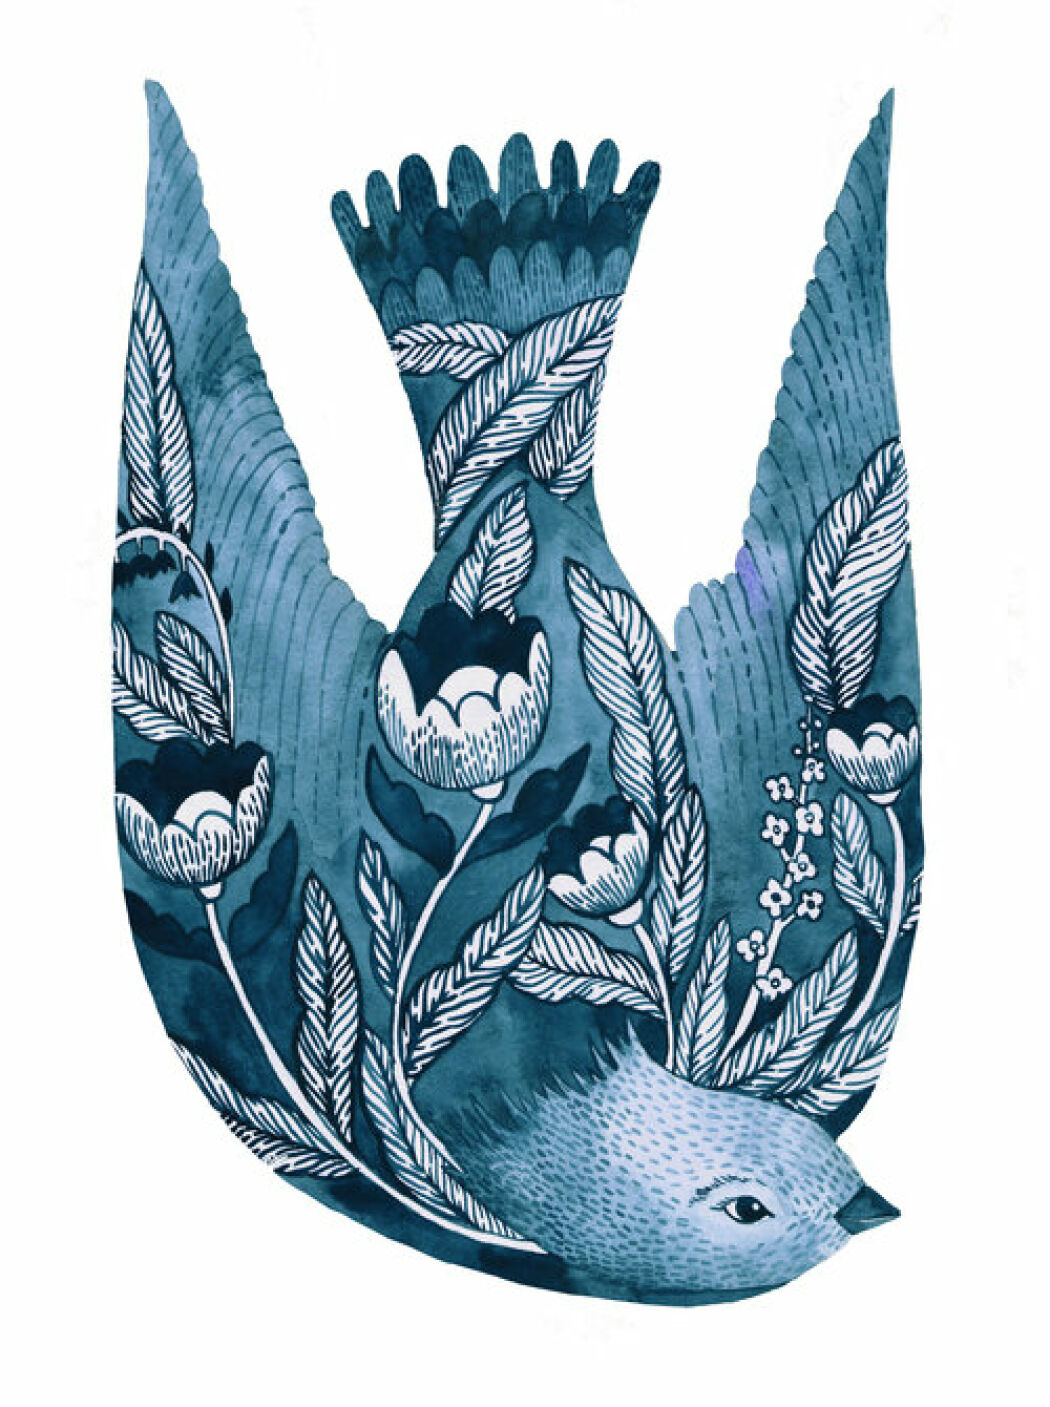 Handpainted blue bird with Flower details illustrated and painted by Malin Gyllensvaan